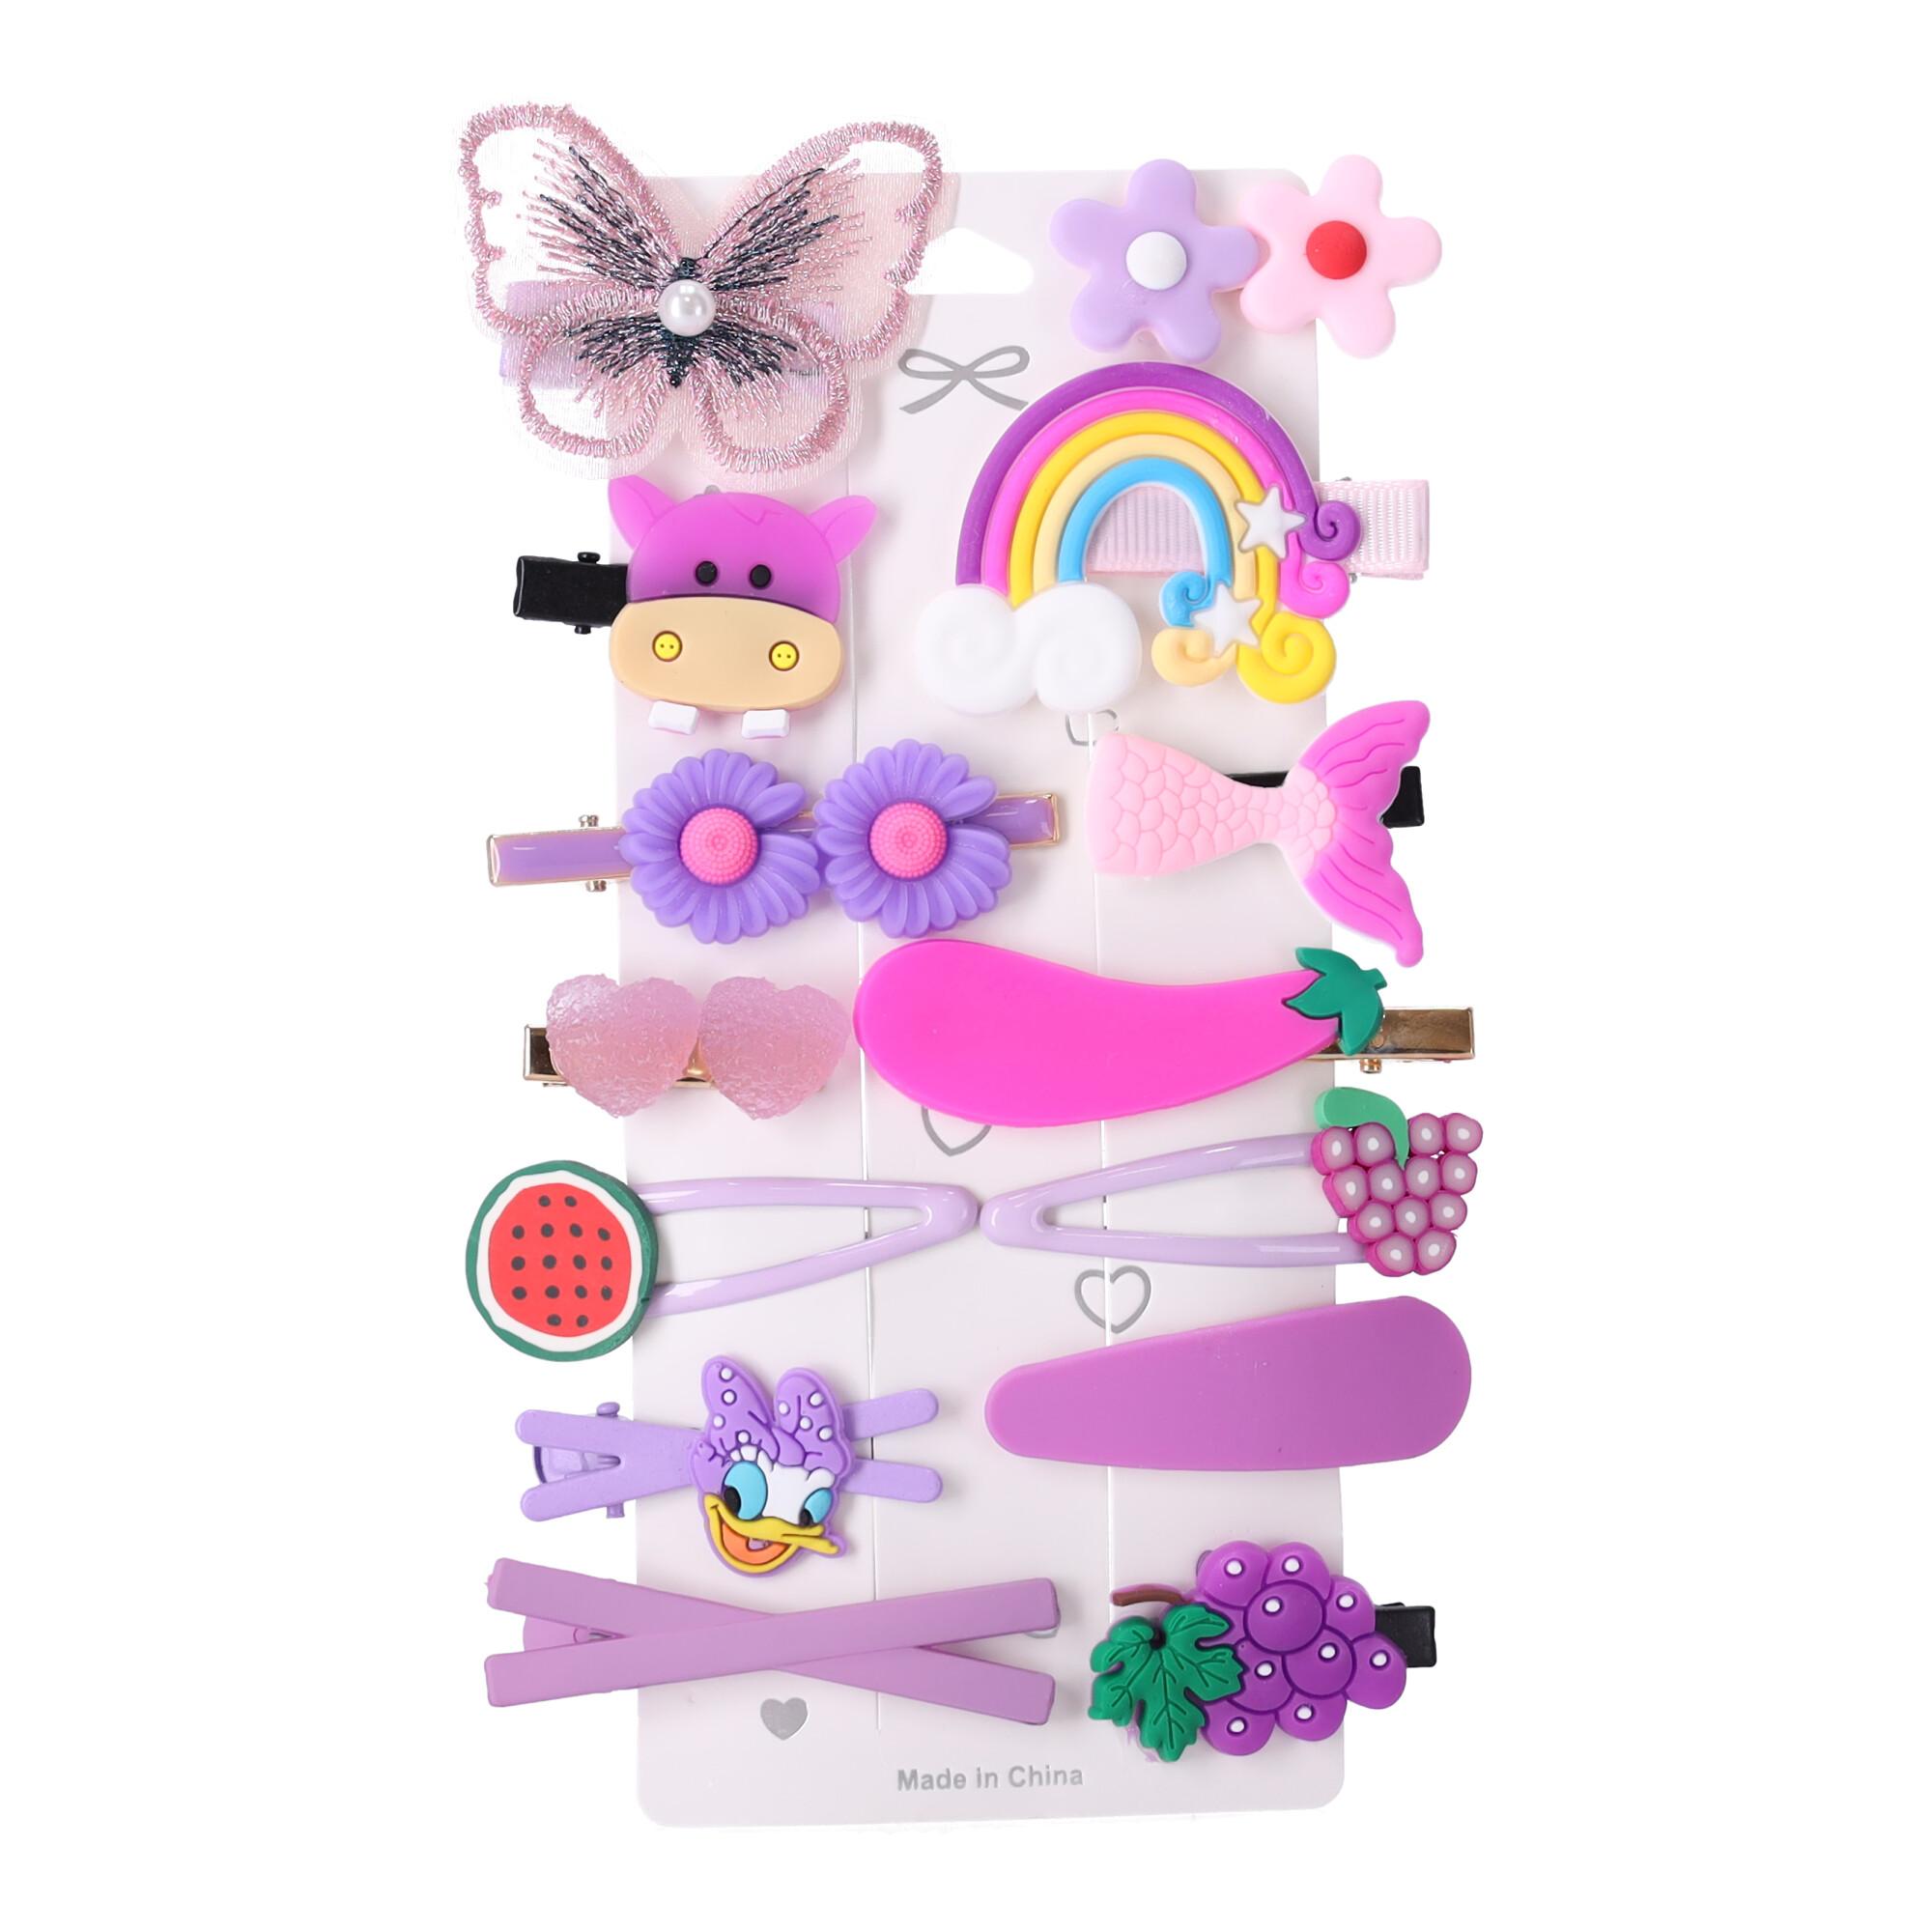 Adorable set of hair clips for a girl - 14pcs, type II